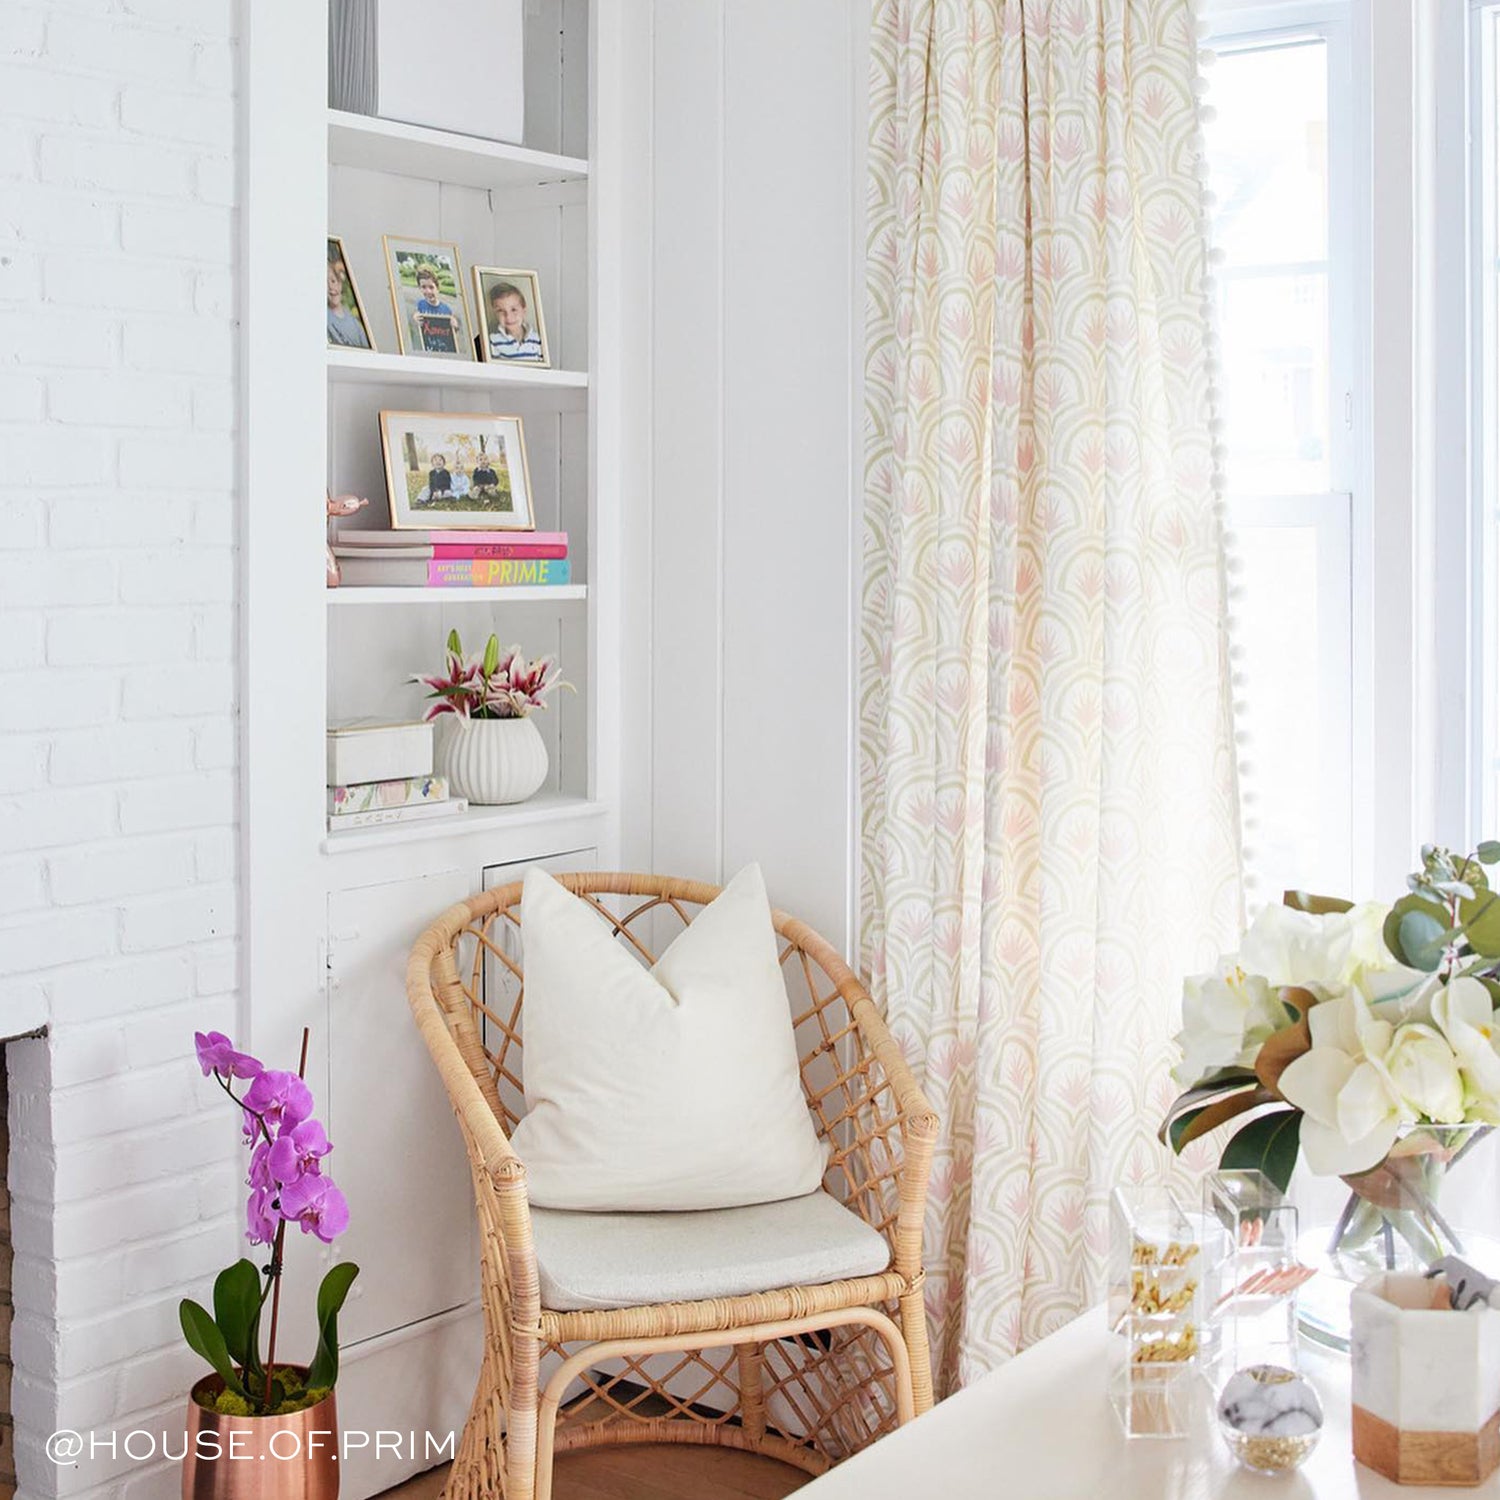 Room corner with white pillow on wooden chair styled with Pink Art Deco Palm Printed Curtains on illuminated window. Photo taken by House of Prim